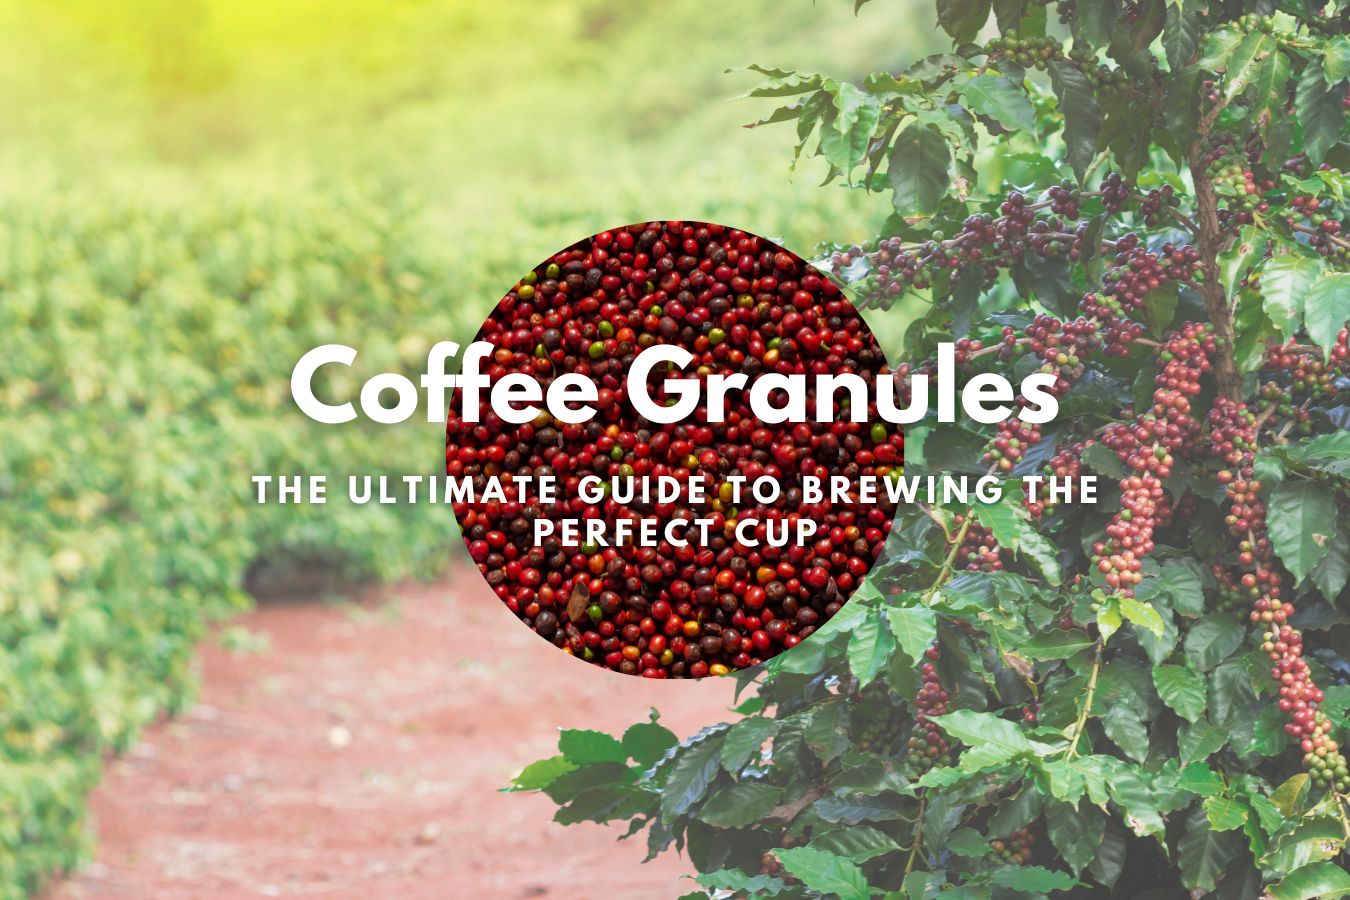 Coffee Granules: The Ultimate Guide to Brewing the Perfect Cup